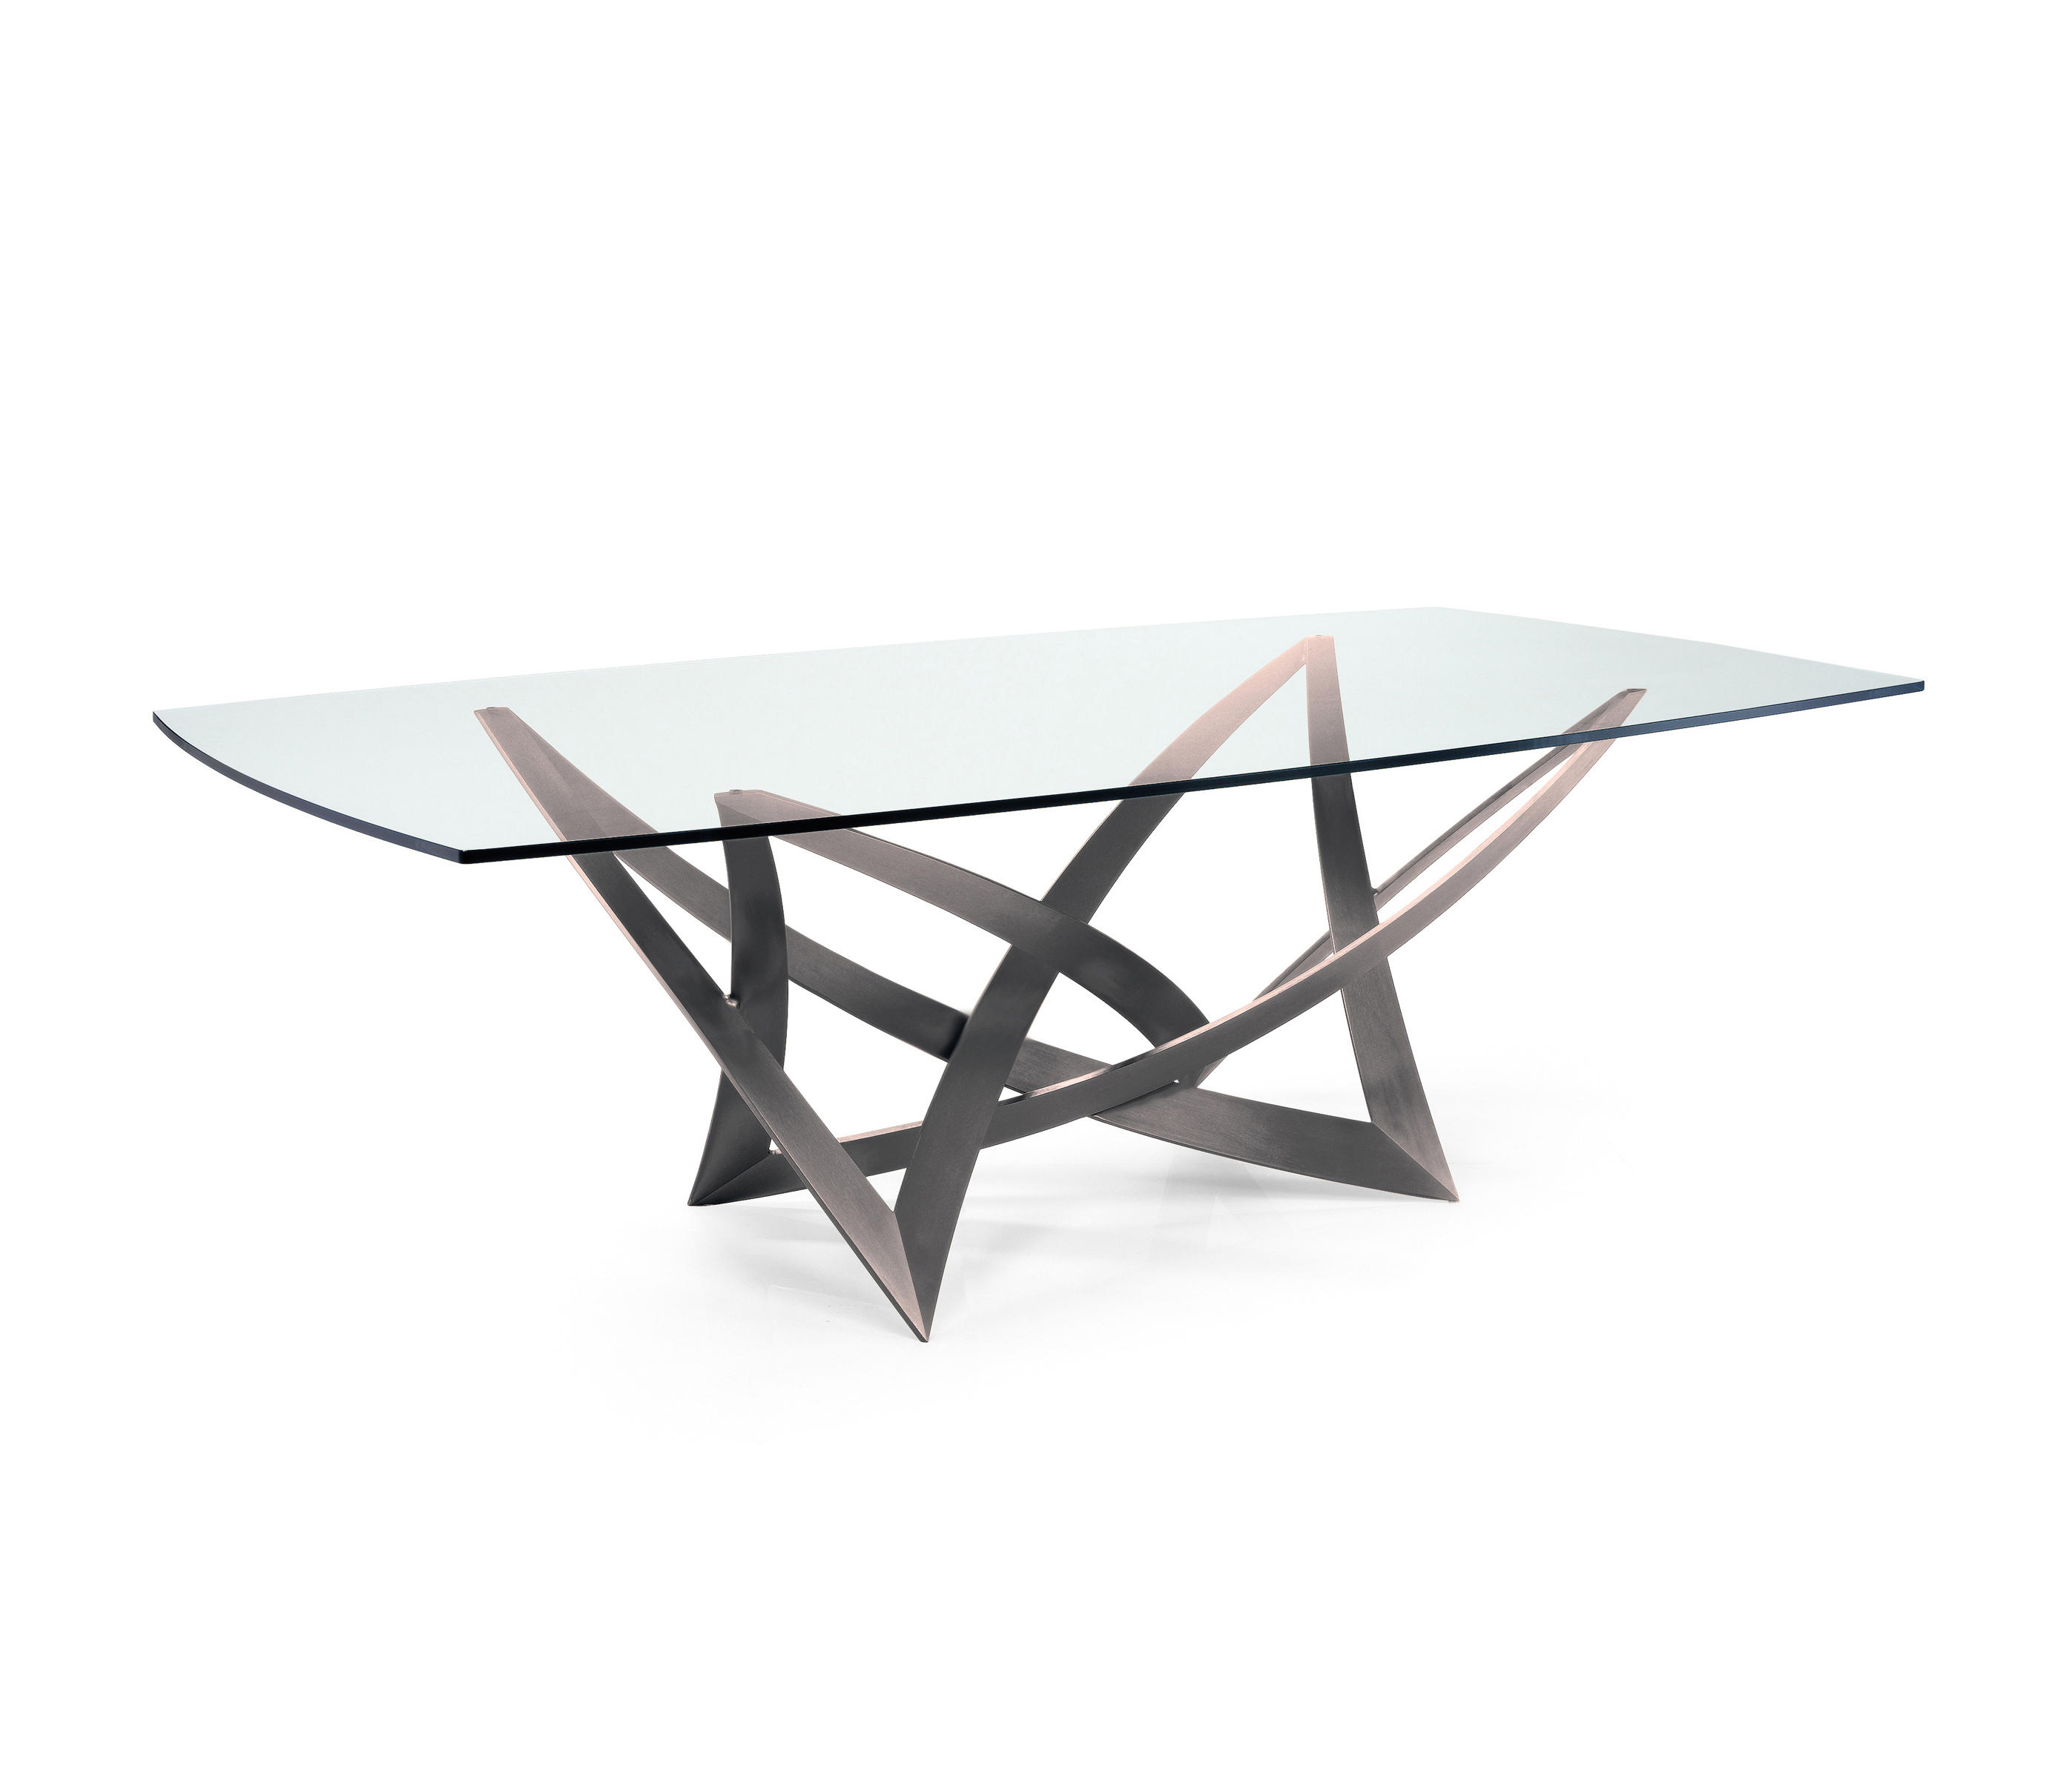 INFINITO 72 - Dining tables from Reflex | Architonic